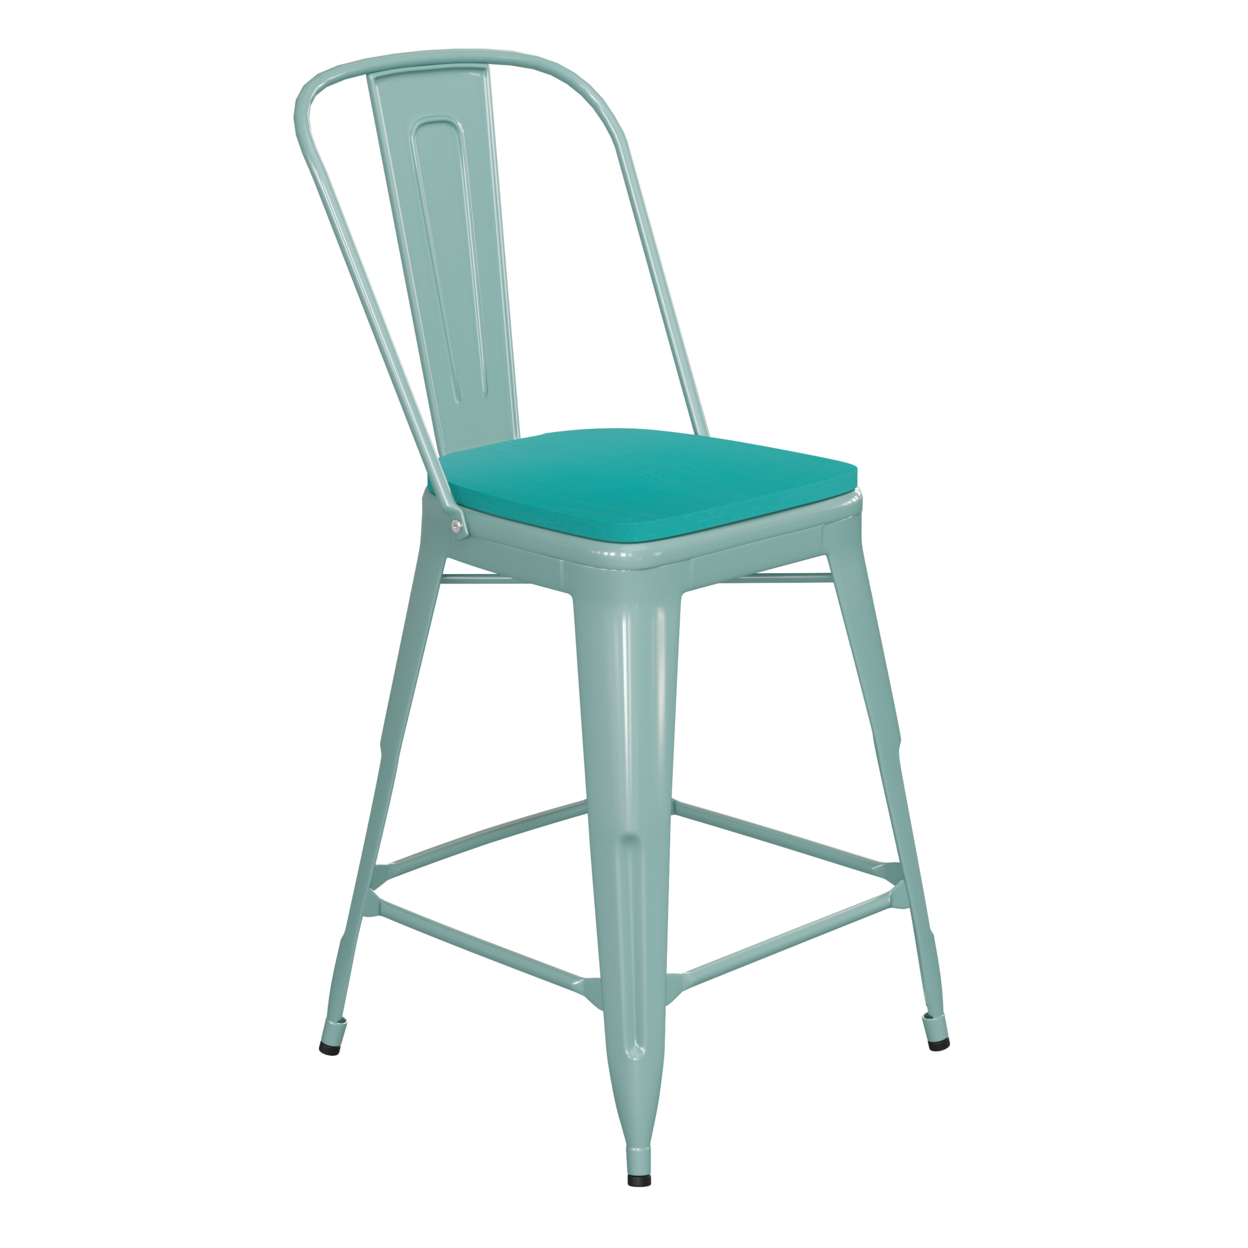 24 Inch Metal Counter Stool, Curved Open Back, Sleek Wood Seat, Mint Blue